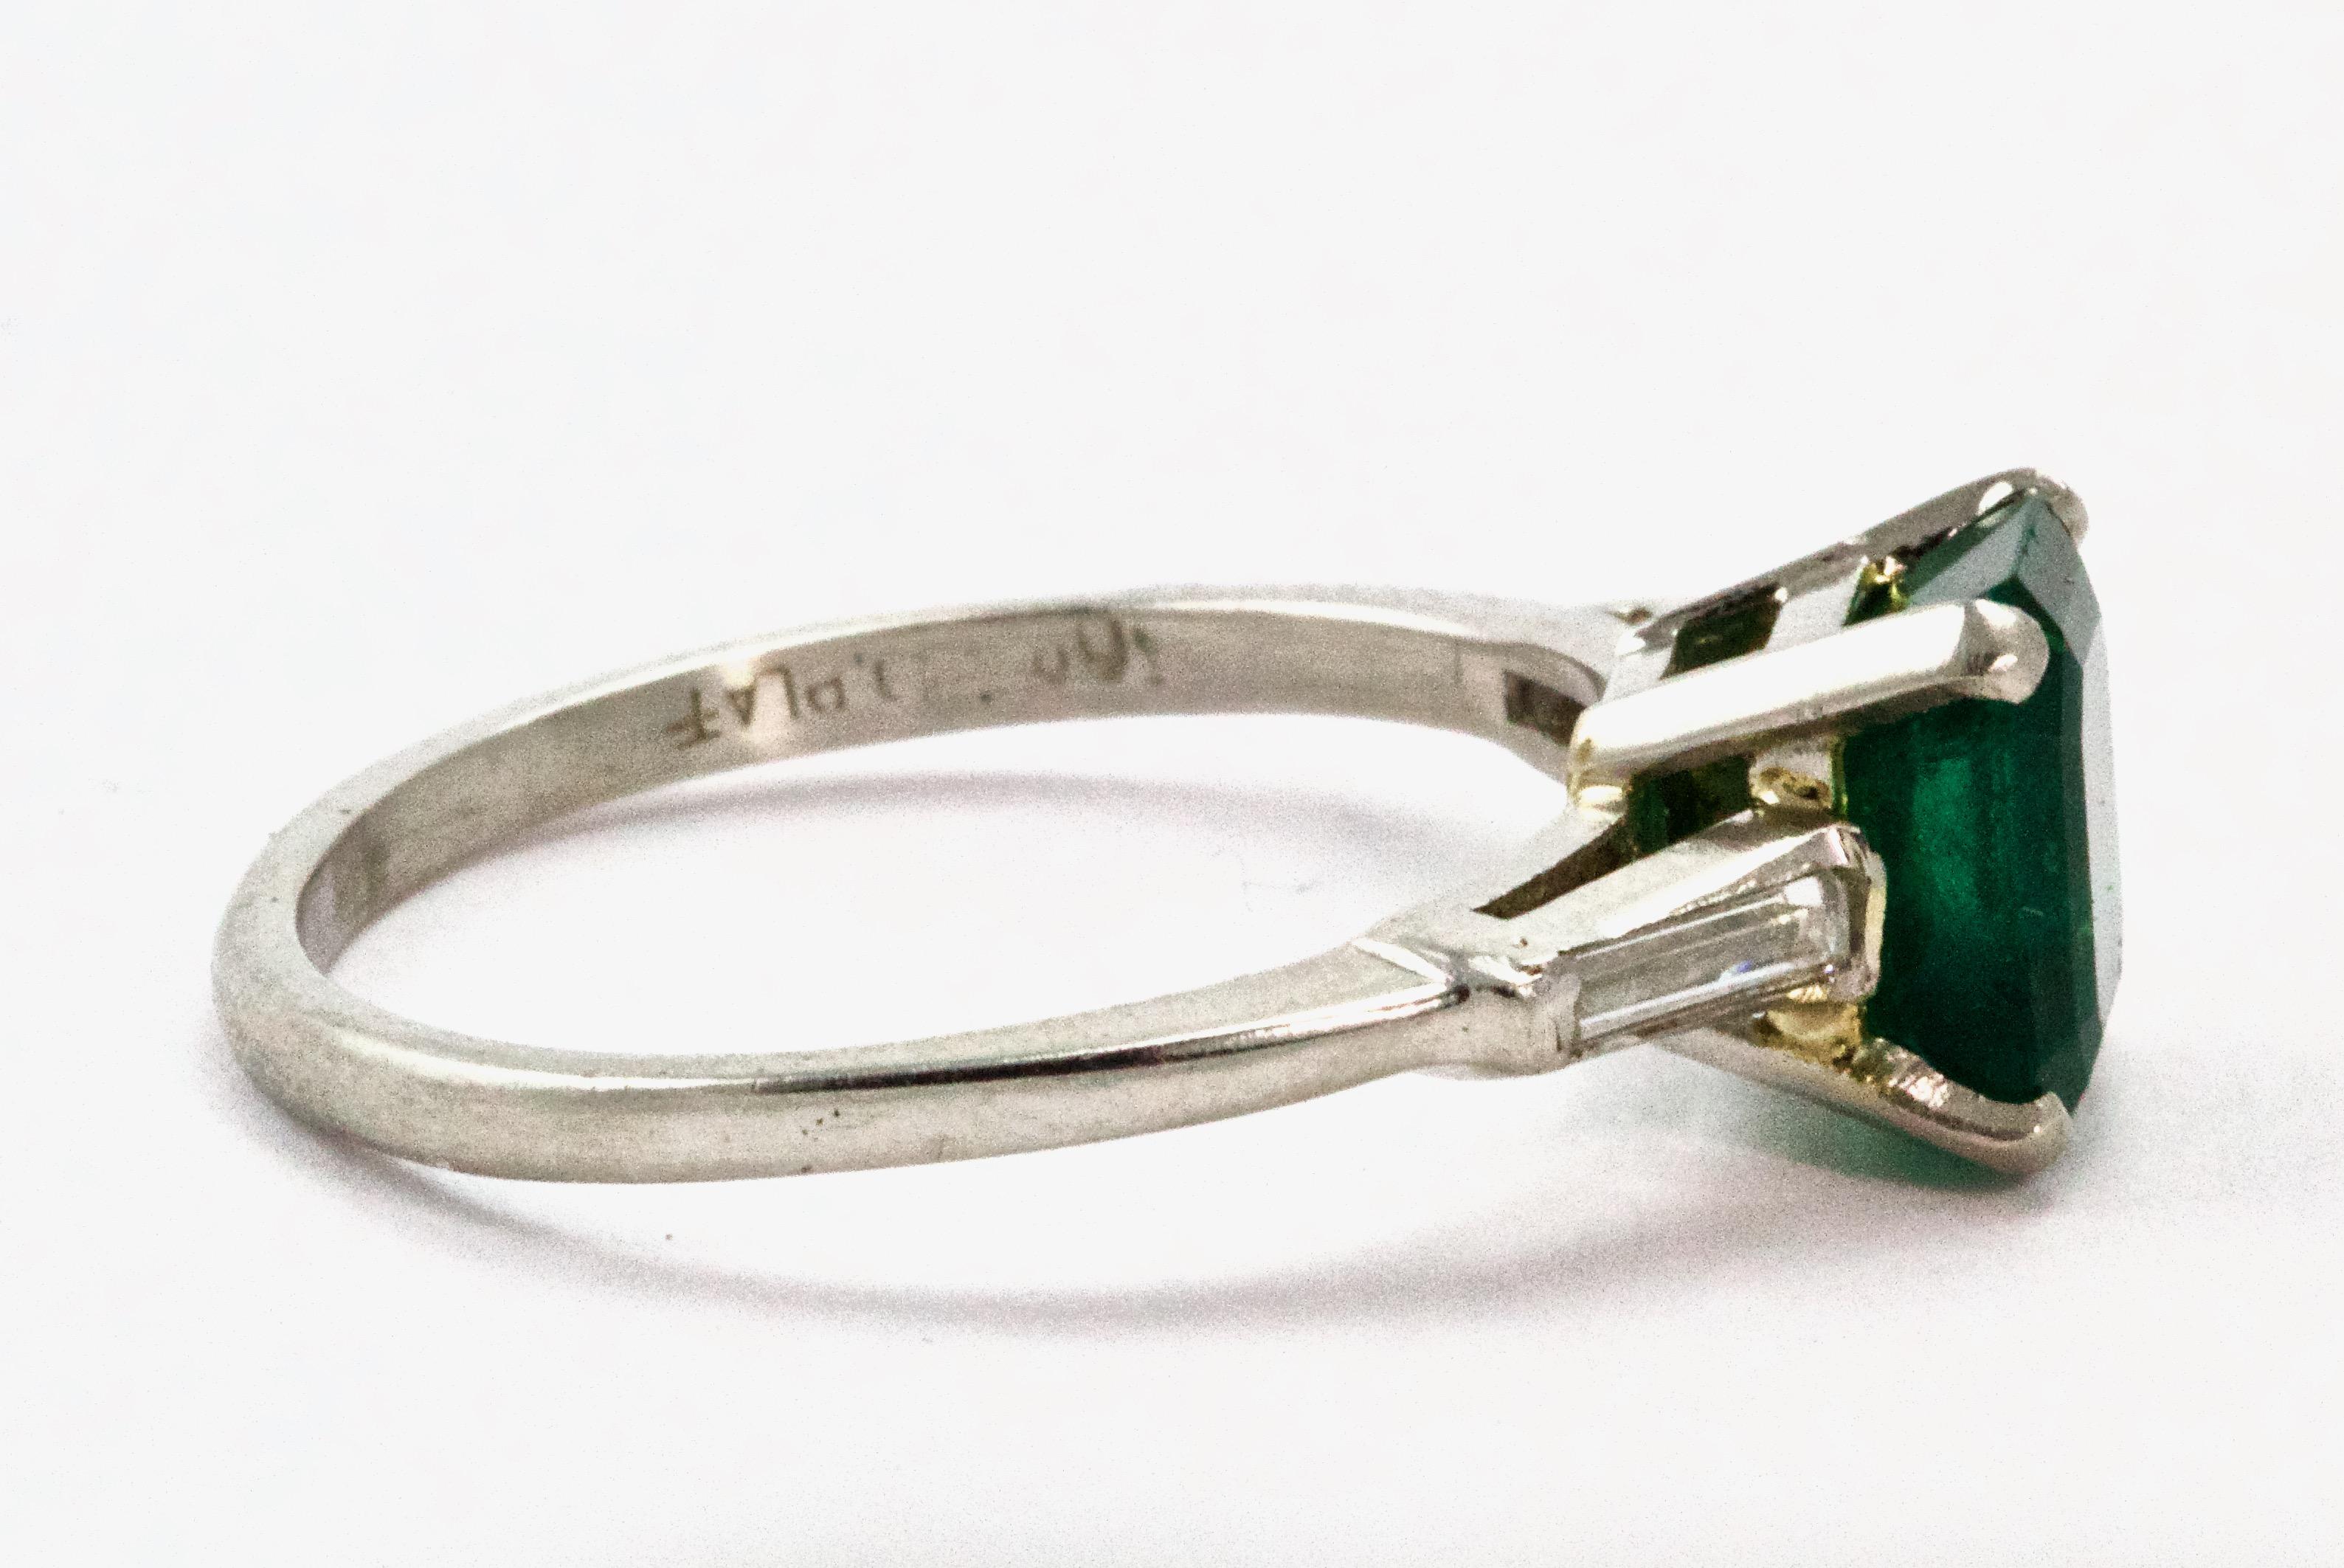 A beautiful Emerald and Diamond engagement ring, modeled in platinum throughout. Set with a natural 1.5 Carat emerald to the center in four claw setting, while delicate tapered baguette diamonds flank the emerald.
Dimensions 
Emerald: 7mm
Ring Size: